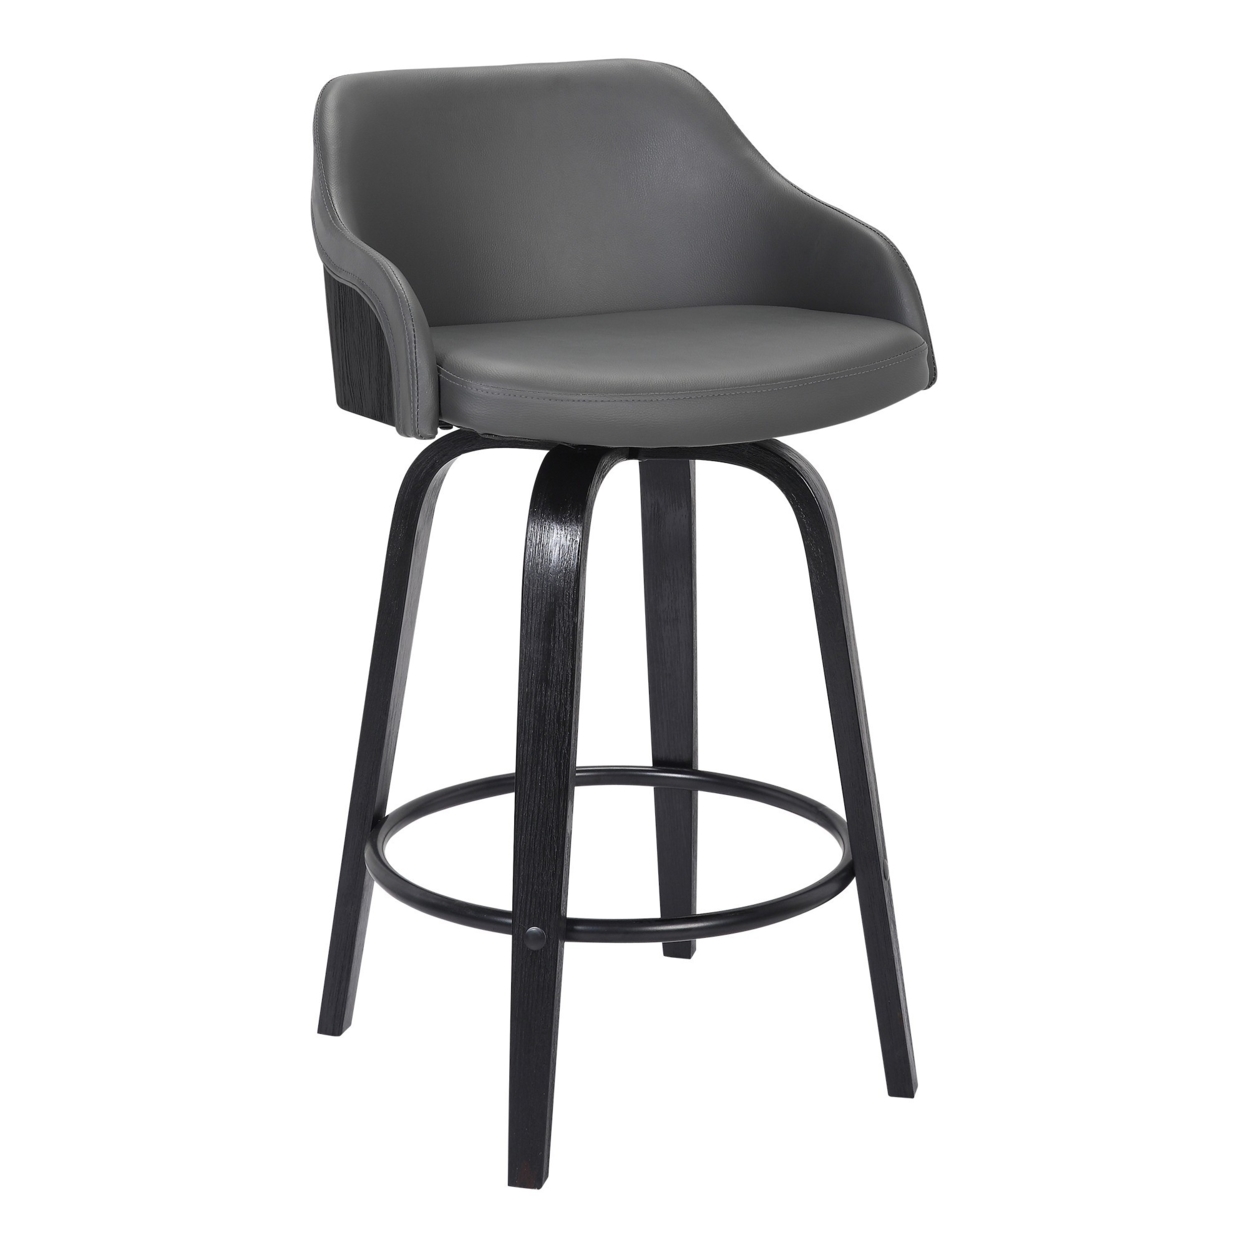 30 Inch Wooden And Leatherette Swivel Barstool, Black And Gray- Saltoro Sherpi